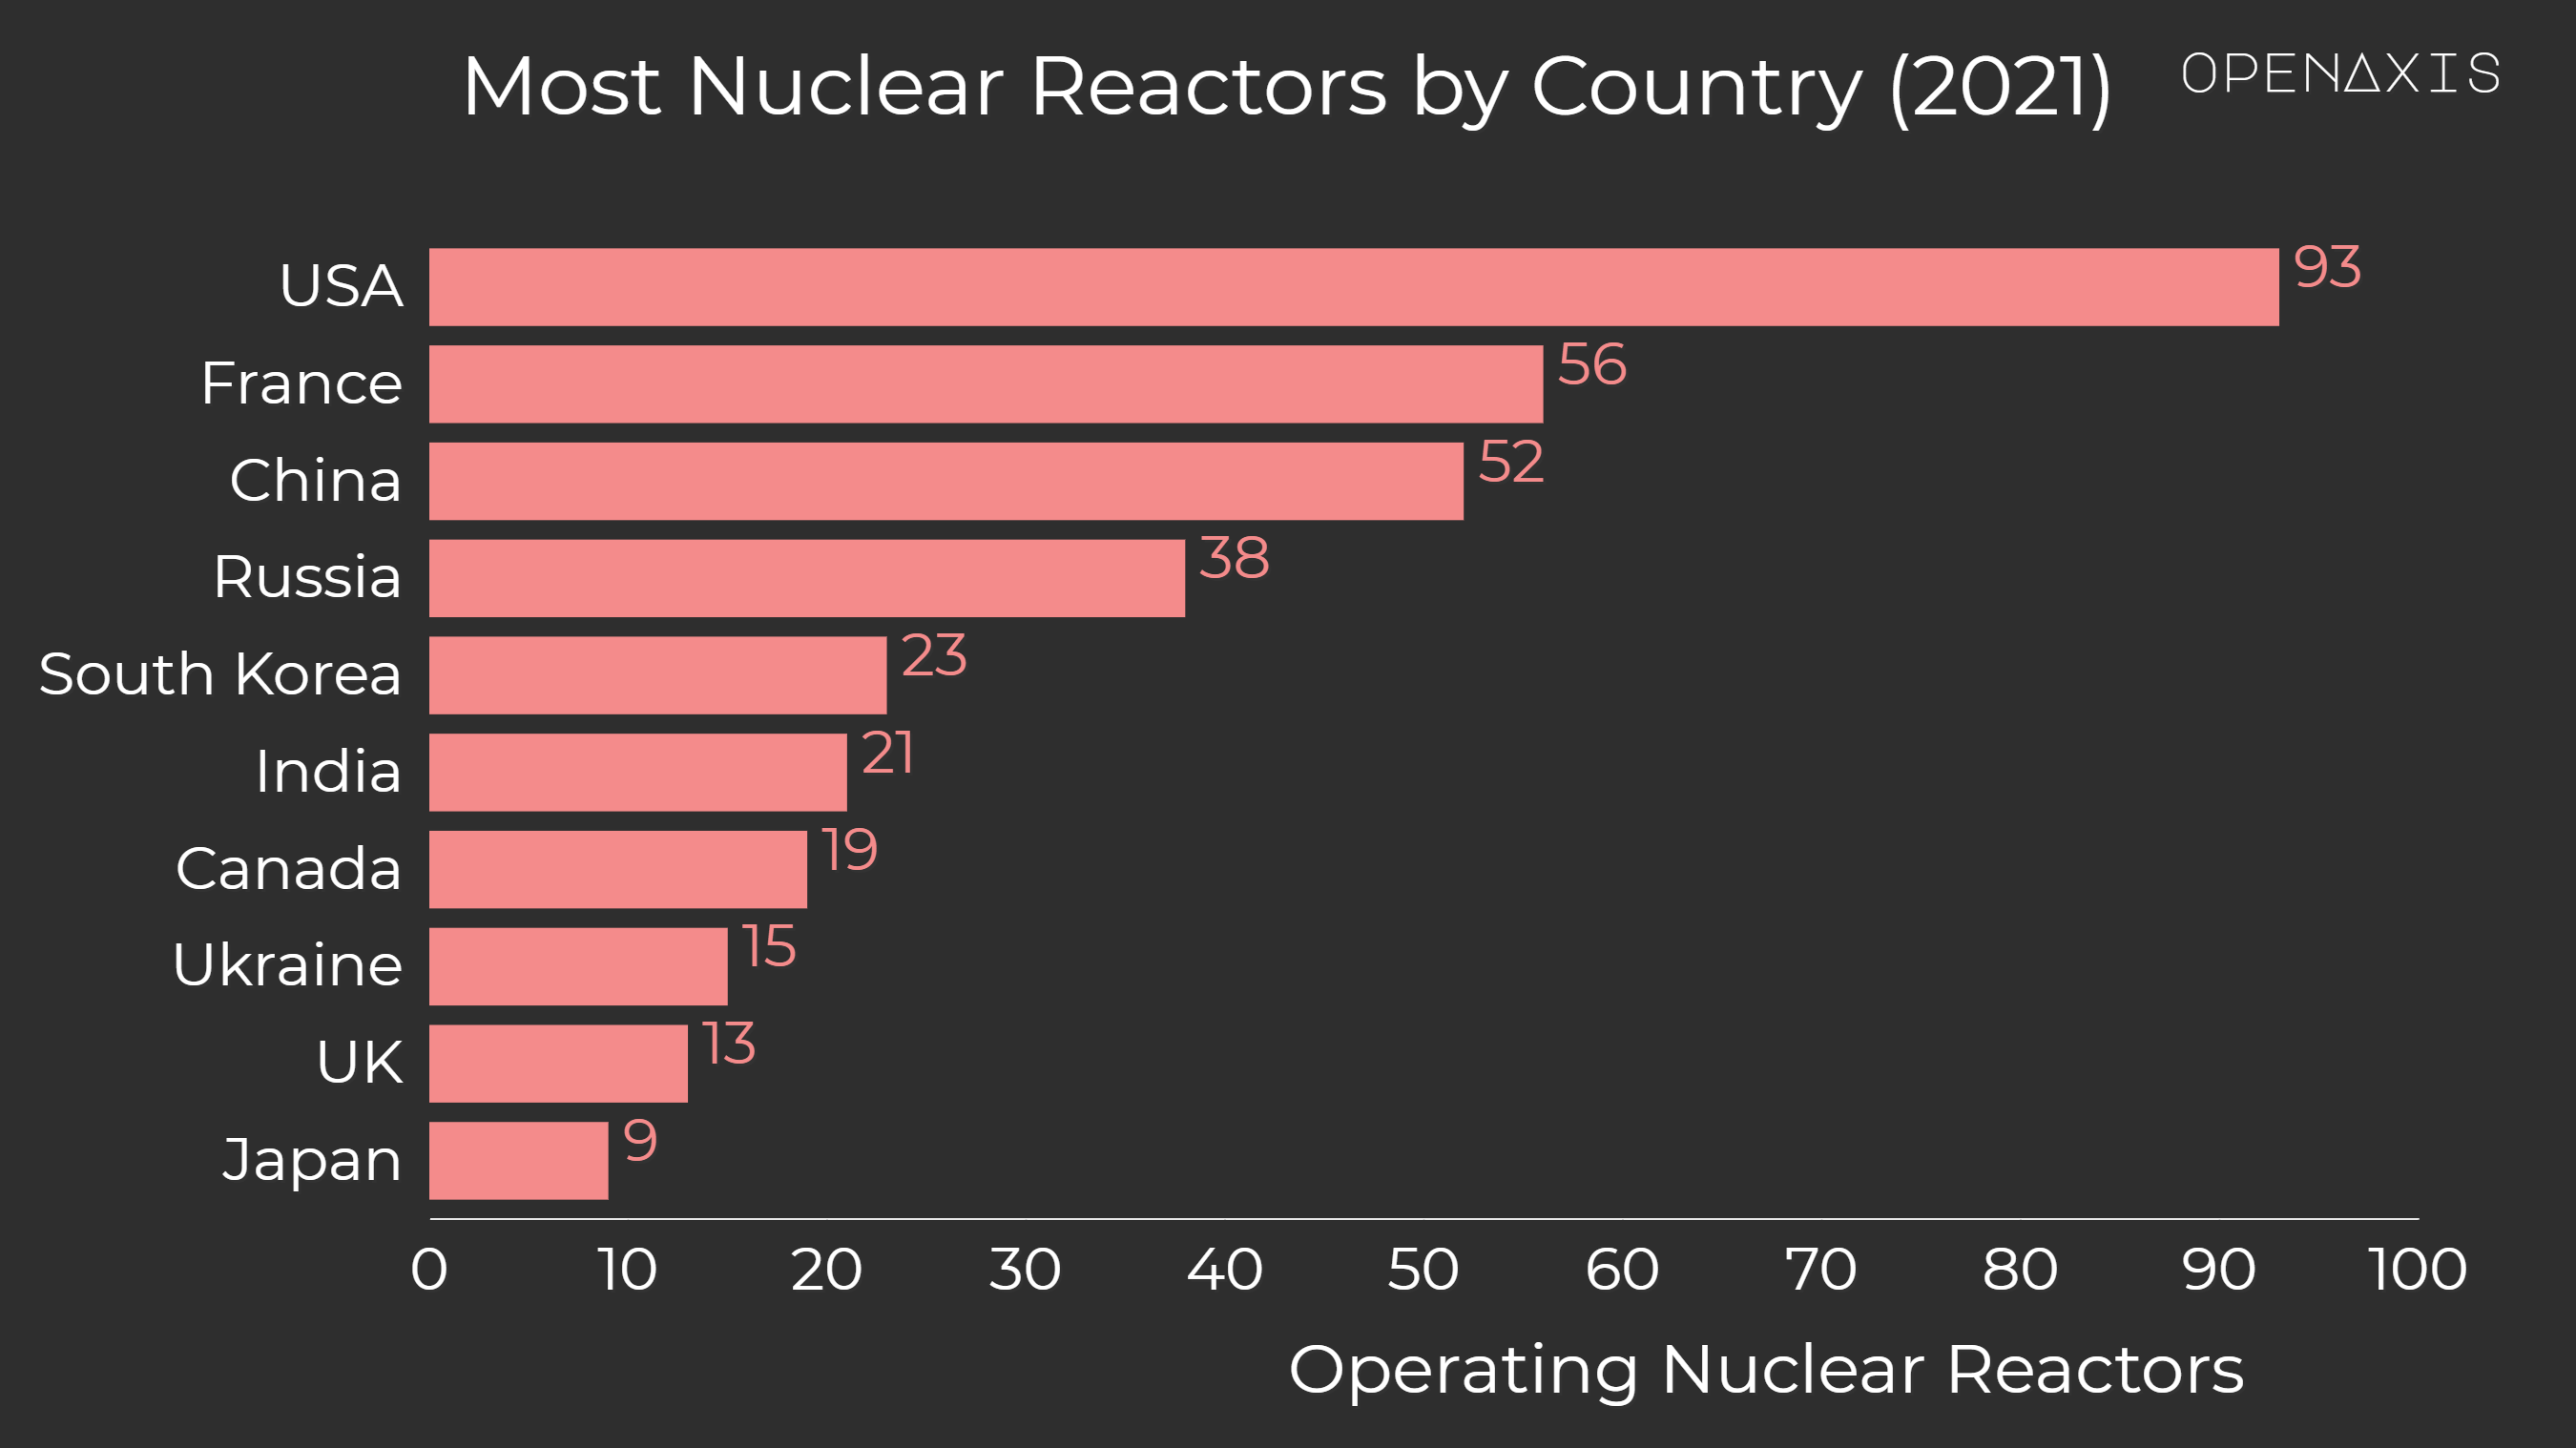 "Most Nuclear Reactors by Country (2021)"